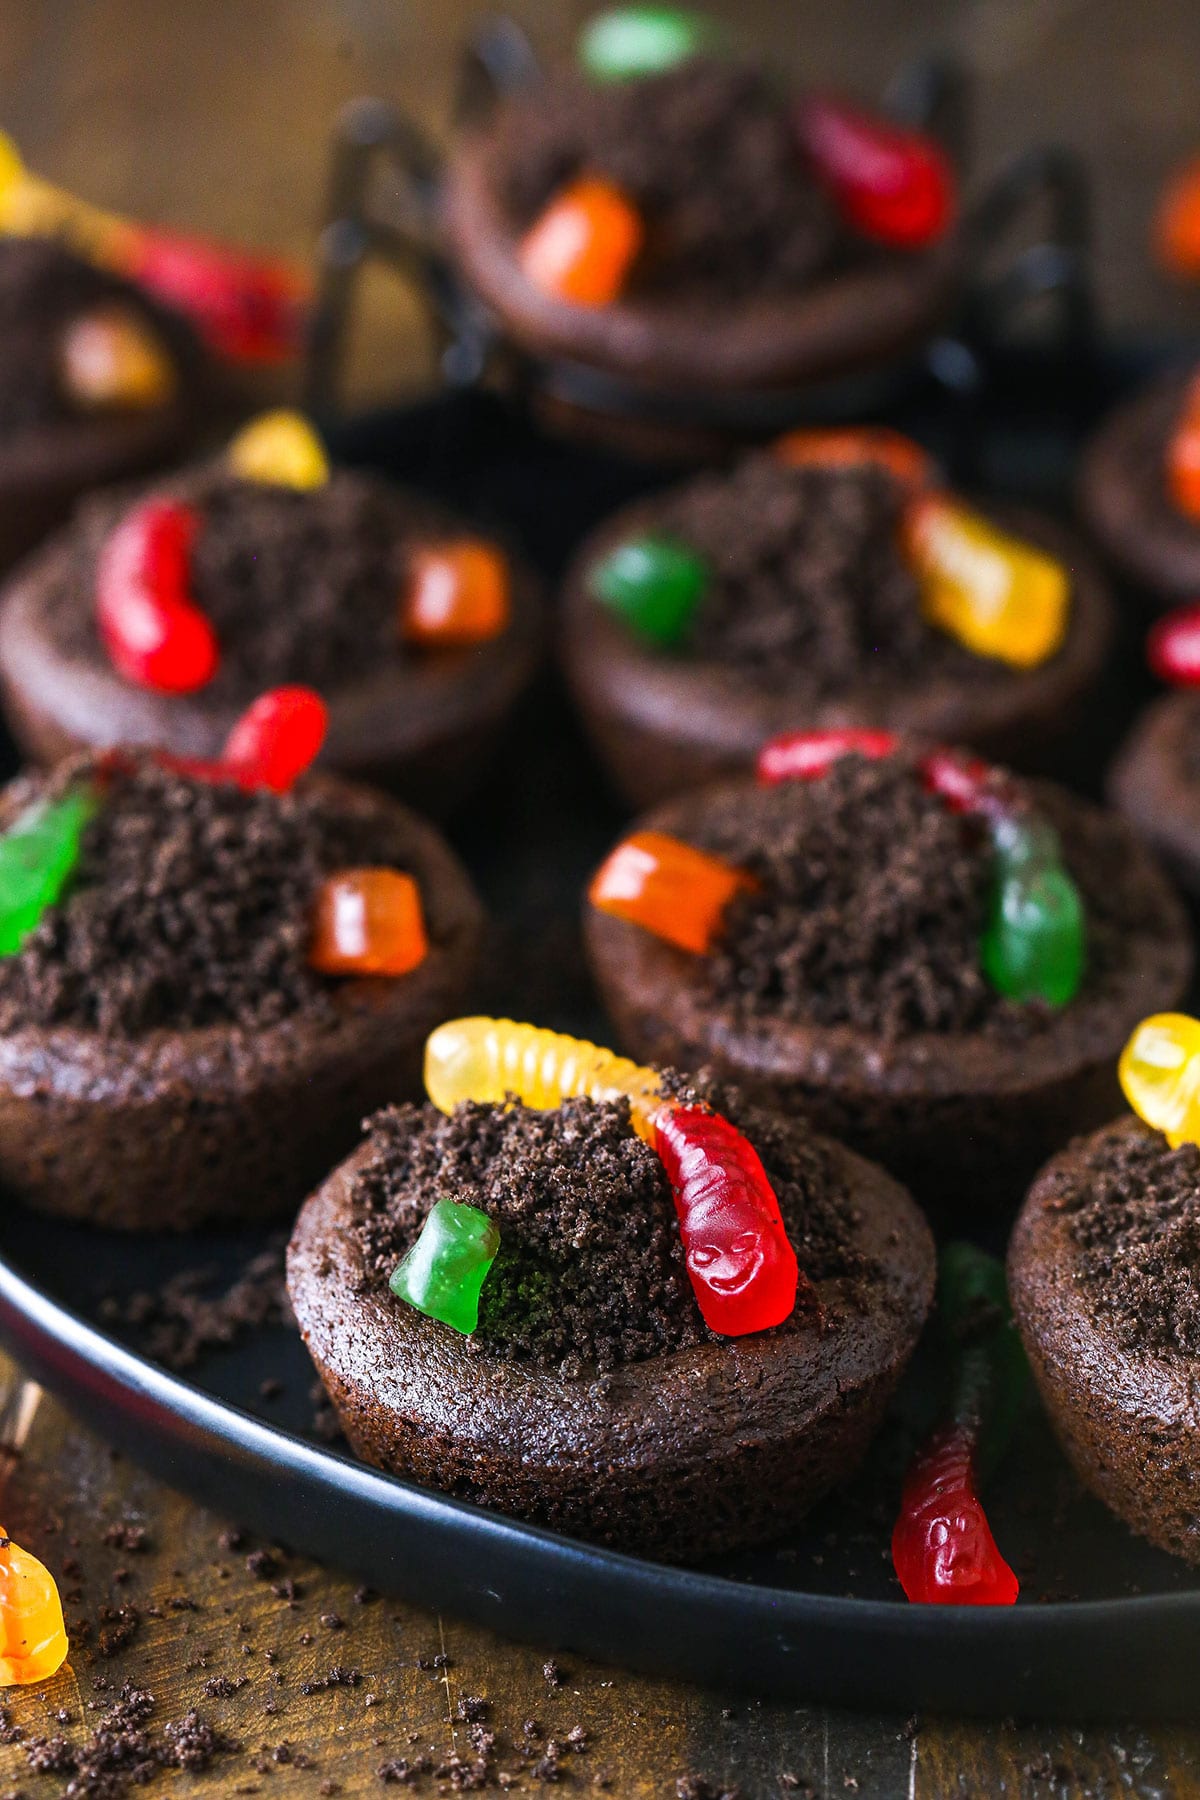 Chocolate cookies stuffed with buttercream frosting, covered with Oreo crumbs and topped with gummy worms